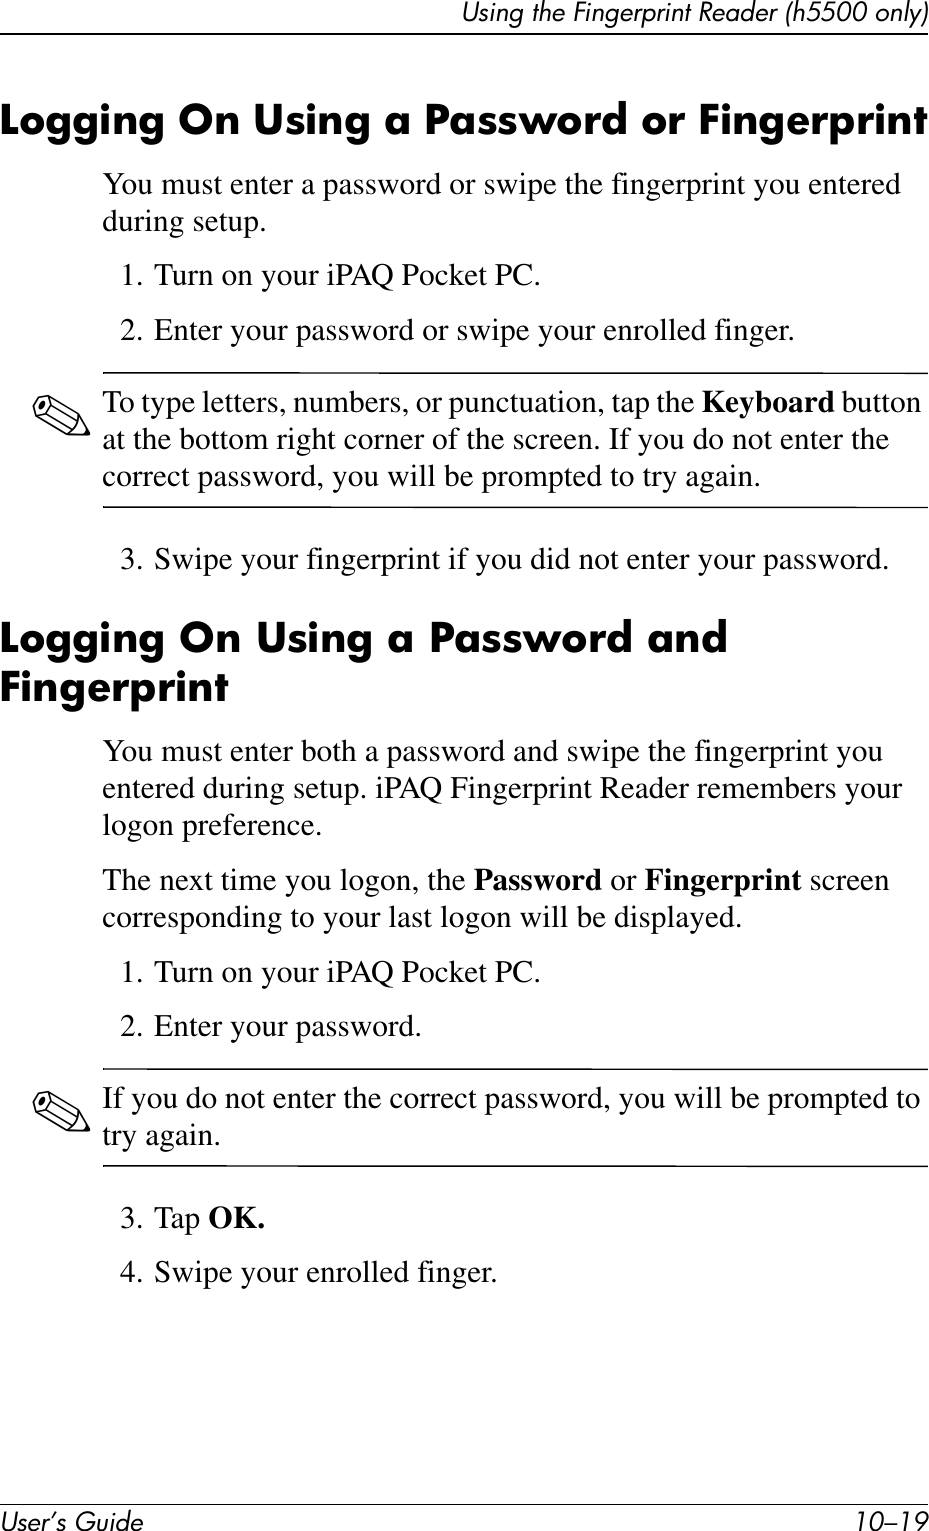 Using the Fingerprint Reader (h5500 only)User’s Guide 10–19Logging On Using a Password or FingerprintYou must enter a password or swipe the fingerprint you entered during setup.1. Turn on your iPAQ Pocket PC.2. Enter your password or swipe your enrolled finger.✎To type letters, numbers, or punctuation, tap the Keyboard button at the bottom right corner of the screen. If you do not enter the correct password, you will be prompted to try again.3. Swipe your fingerprint if you did not enter your password.Logging On Using a Password and FingerprintYou must enter both a password and swipe the fingerprint you entered during setup. iPAQ Fingerprint Reader remembers your logon preference.The next time you logon, the Password or Fingerprint screen corresponding to your last logon will be displayed.1. Turn on your iPAQ Pocket PC.2. Enter your password.✎If you do not enter the correct password, you will be prompted to try again.3. Tap OK.4. Swipe your enrolled finger.